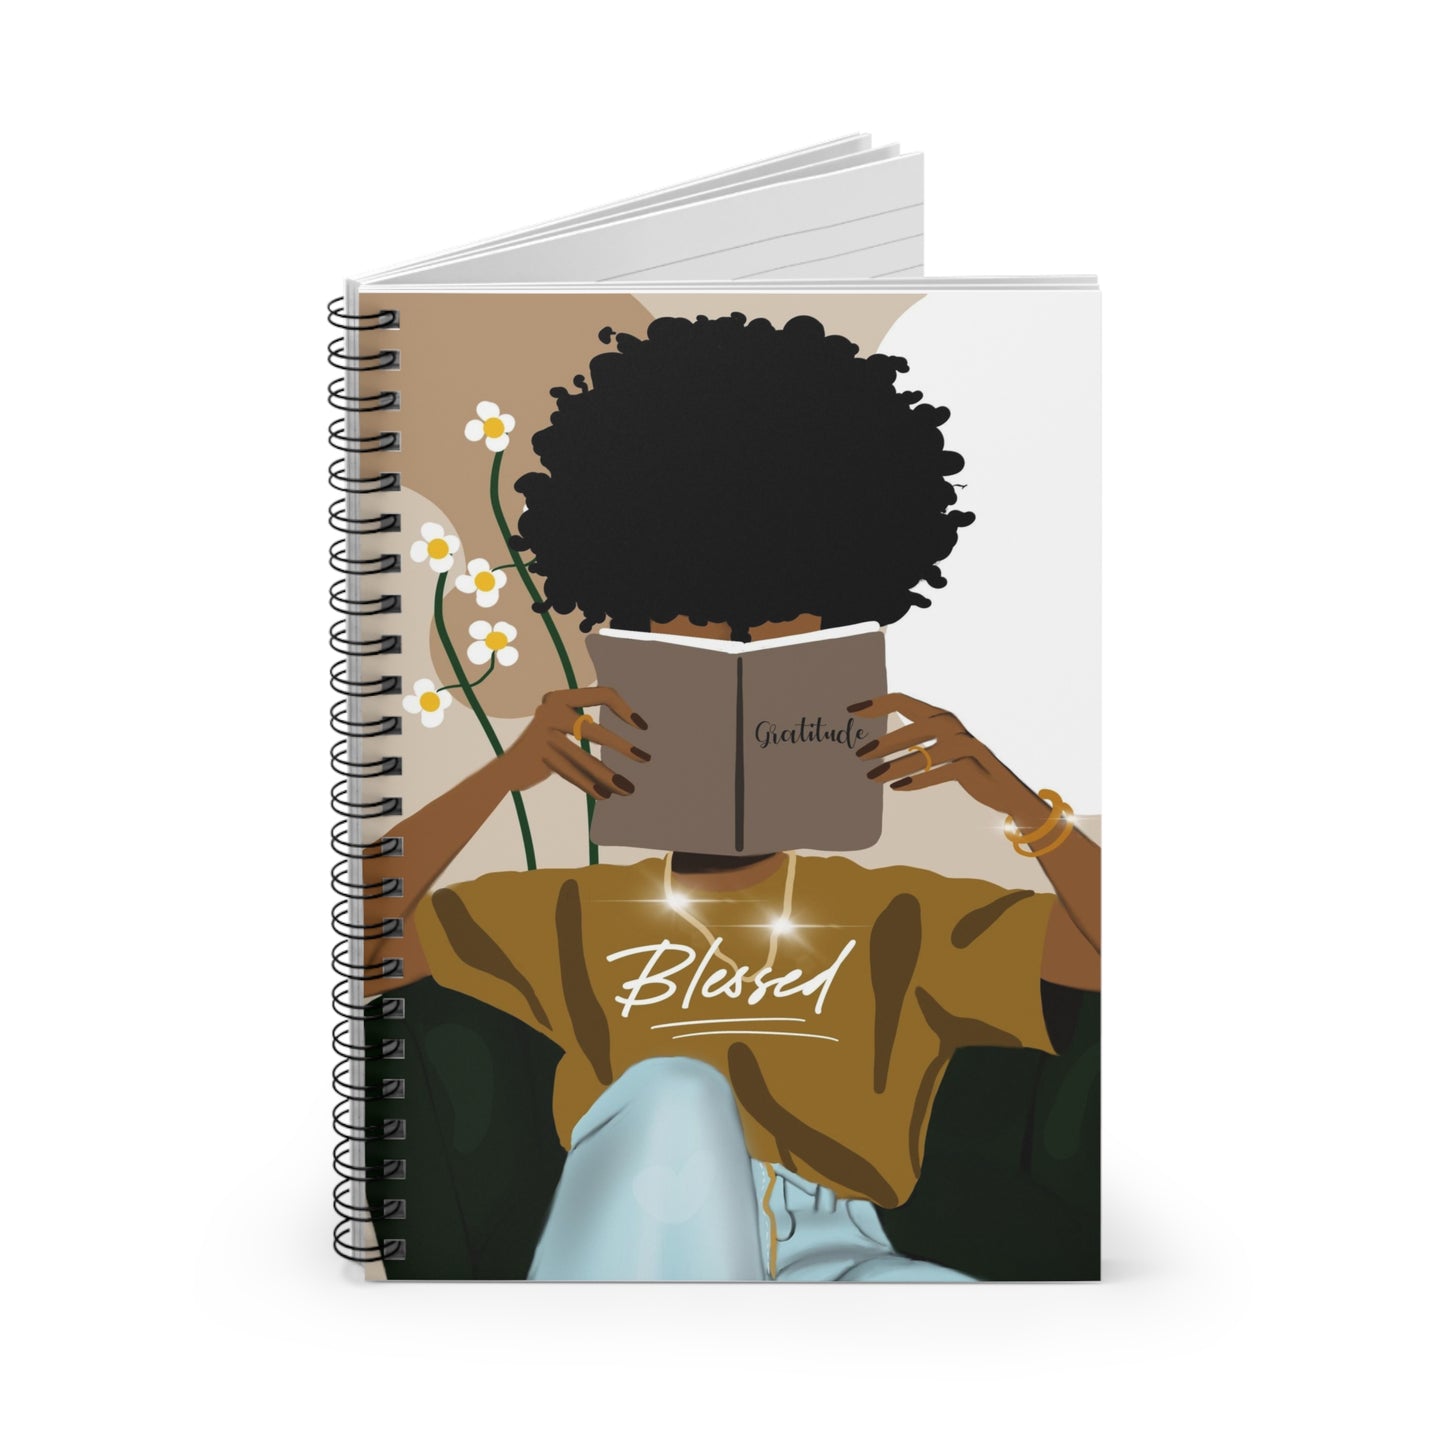 Blessed Spiral Notebook - Ruled Line